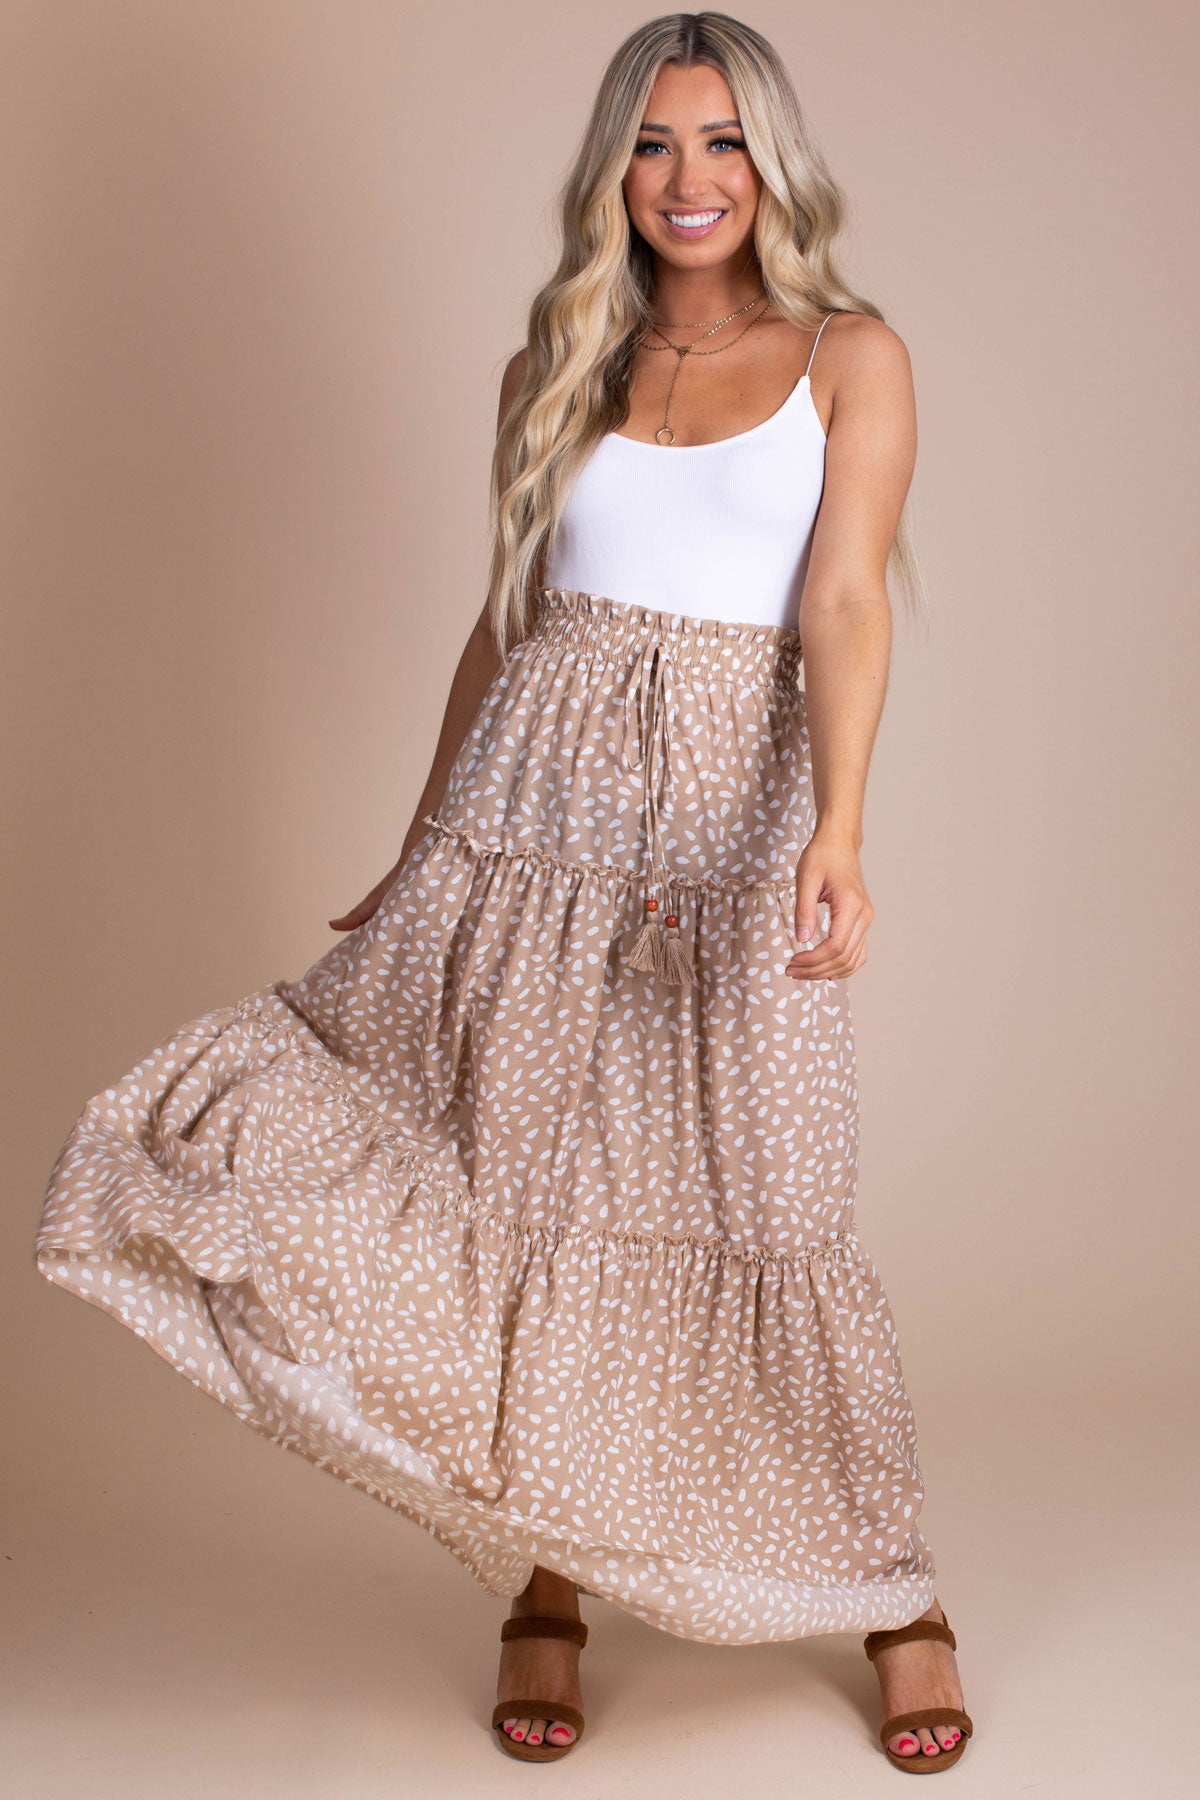 Tiered Maxi Skirt For Women